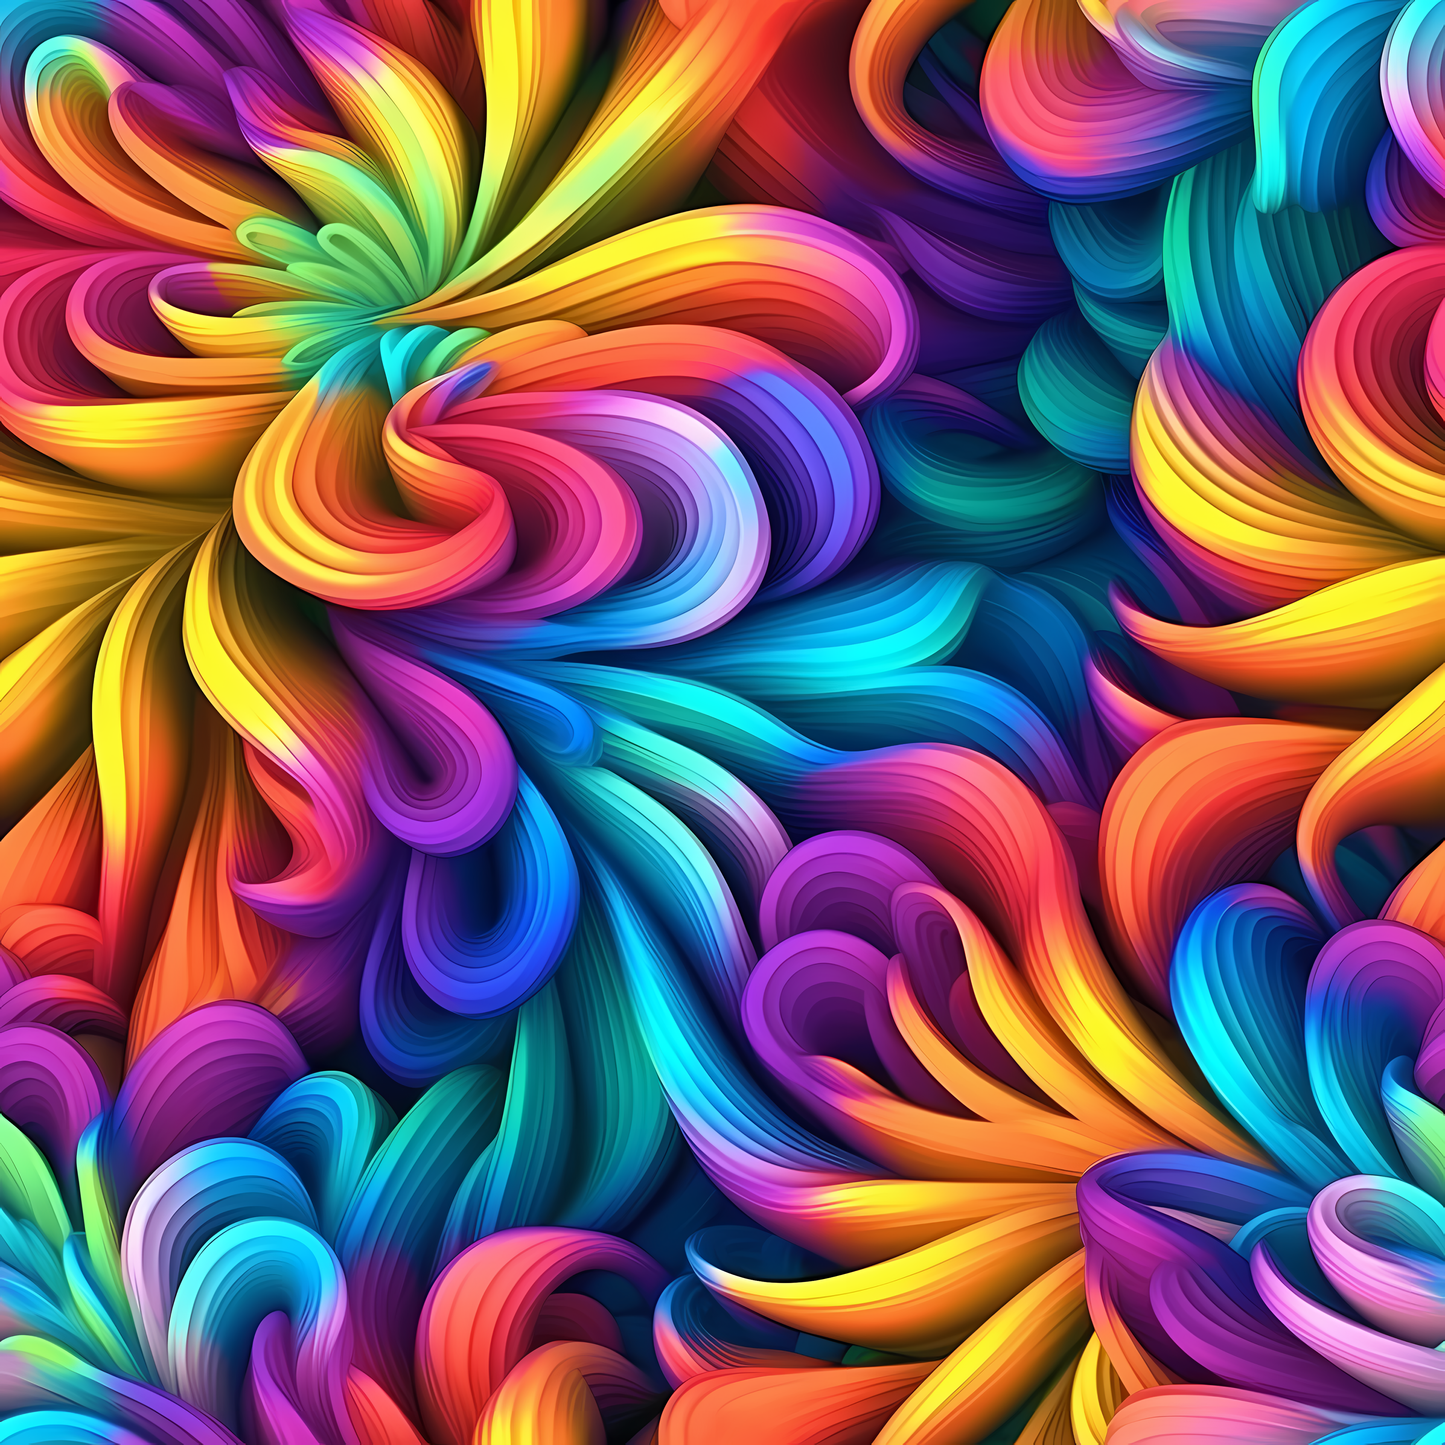 ABSTRACT MULTICOLORED